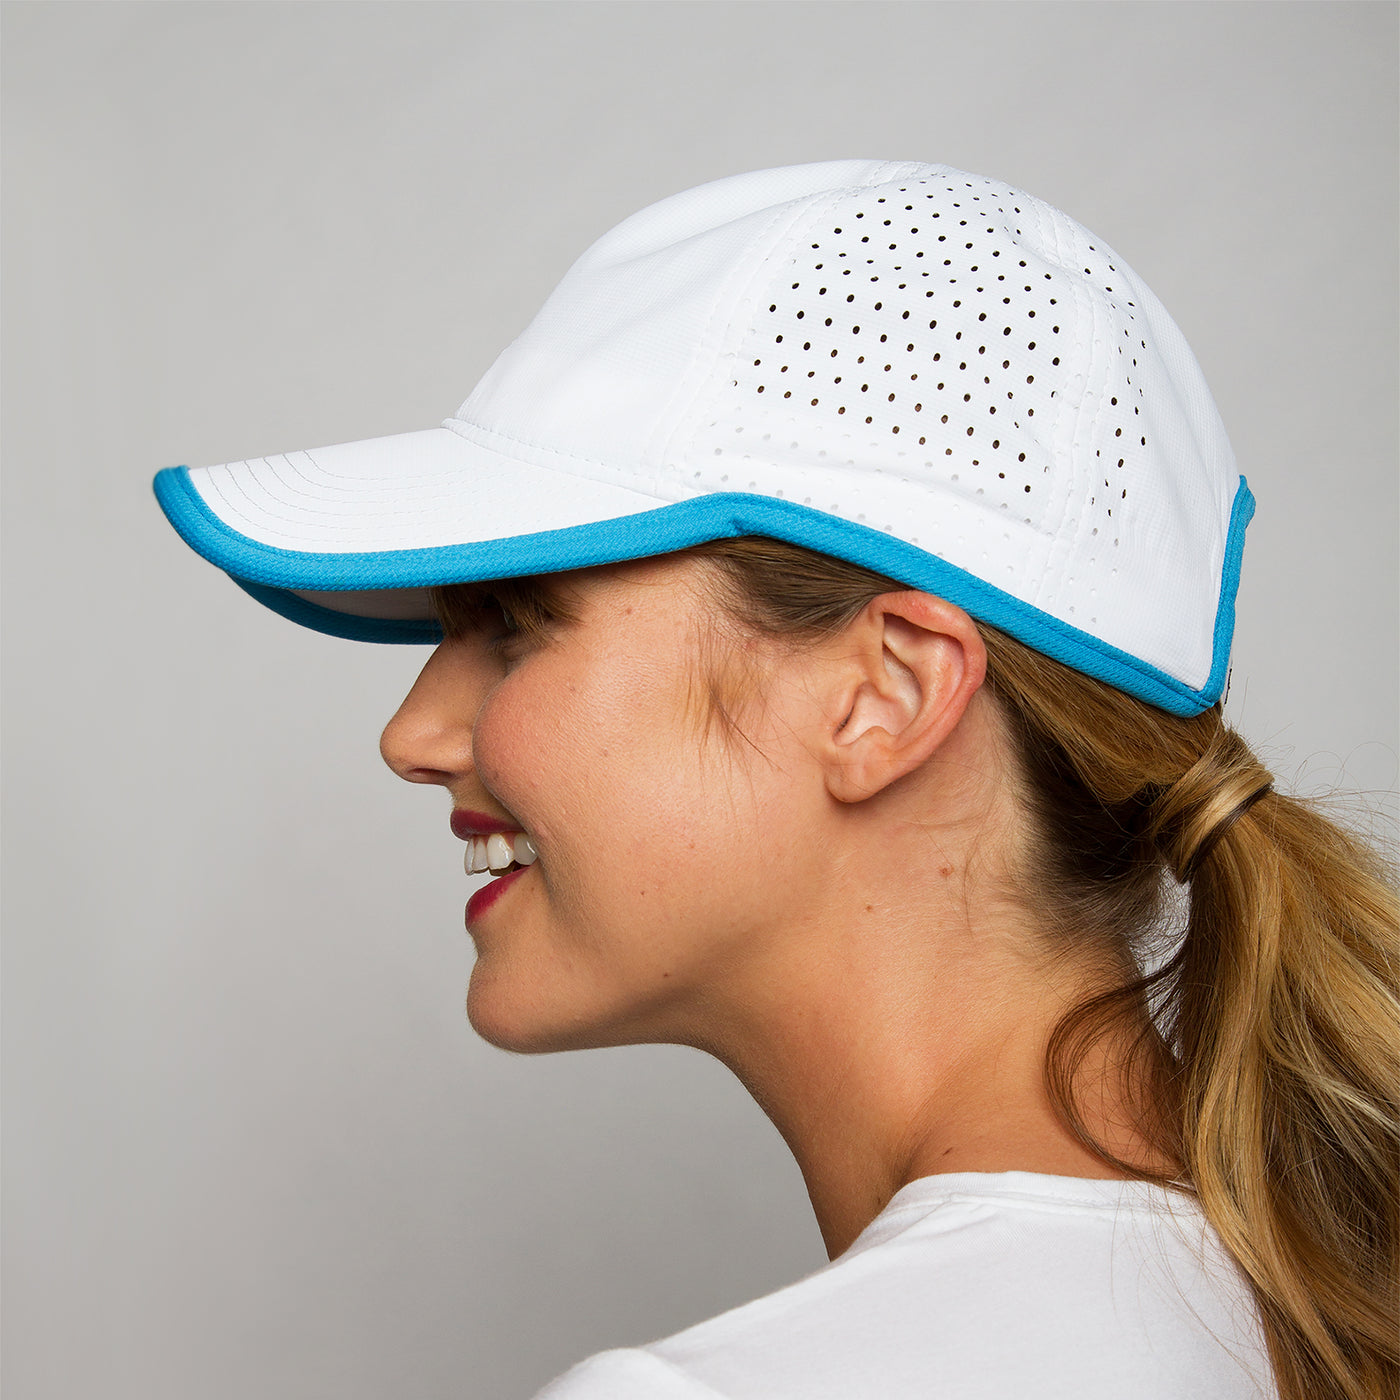 woman wears white sport hat with blue trim.